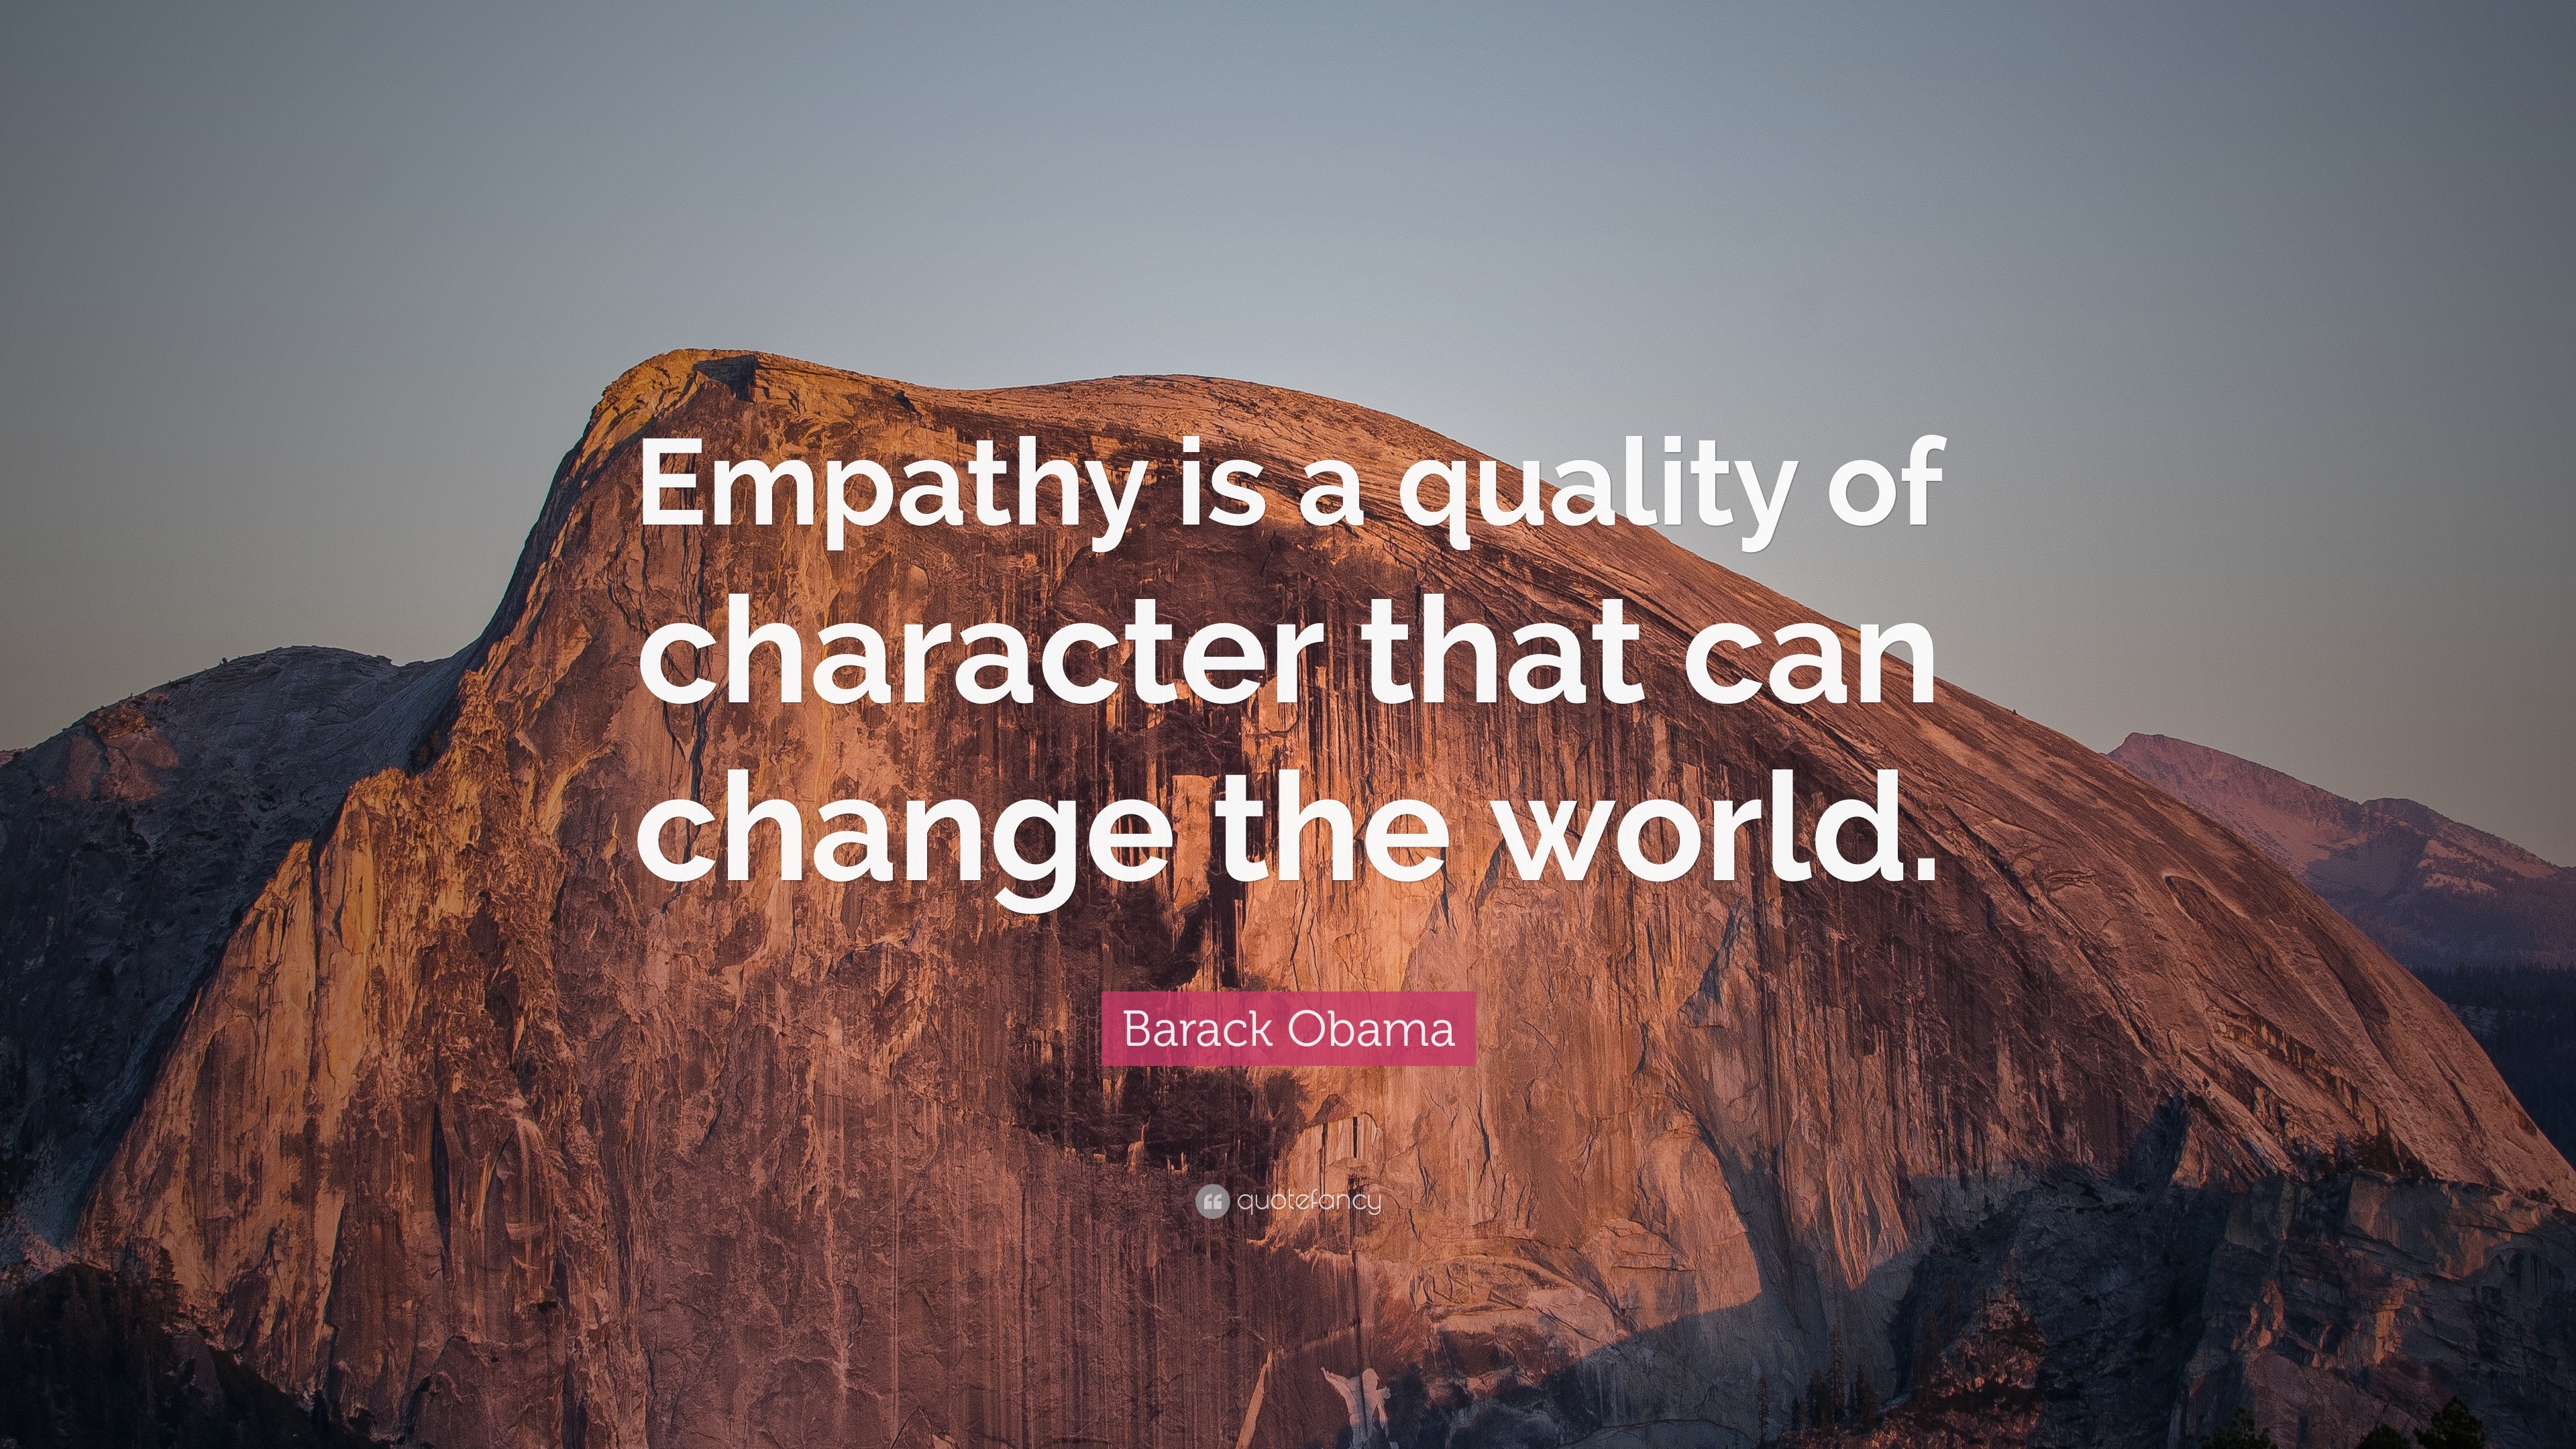 Barack Obama Quote: “Empathy is a quality of character that can change